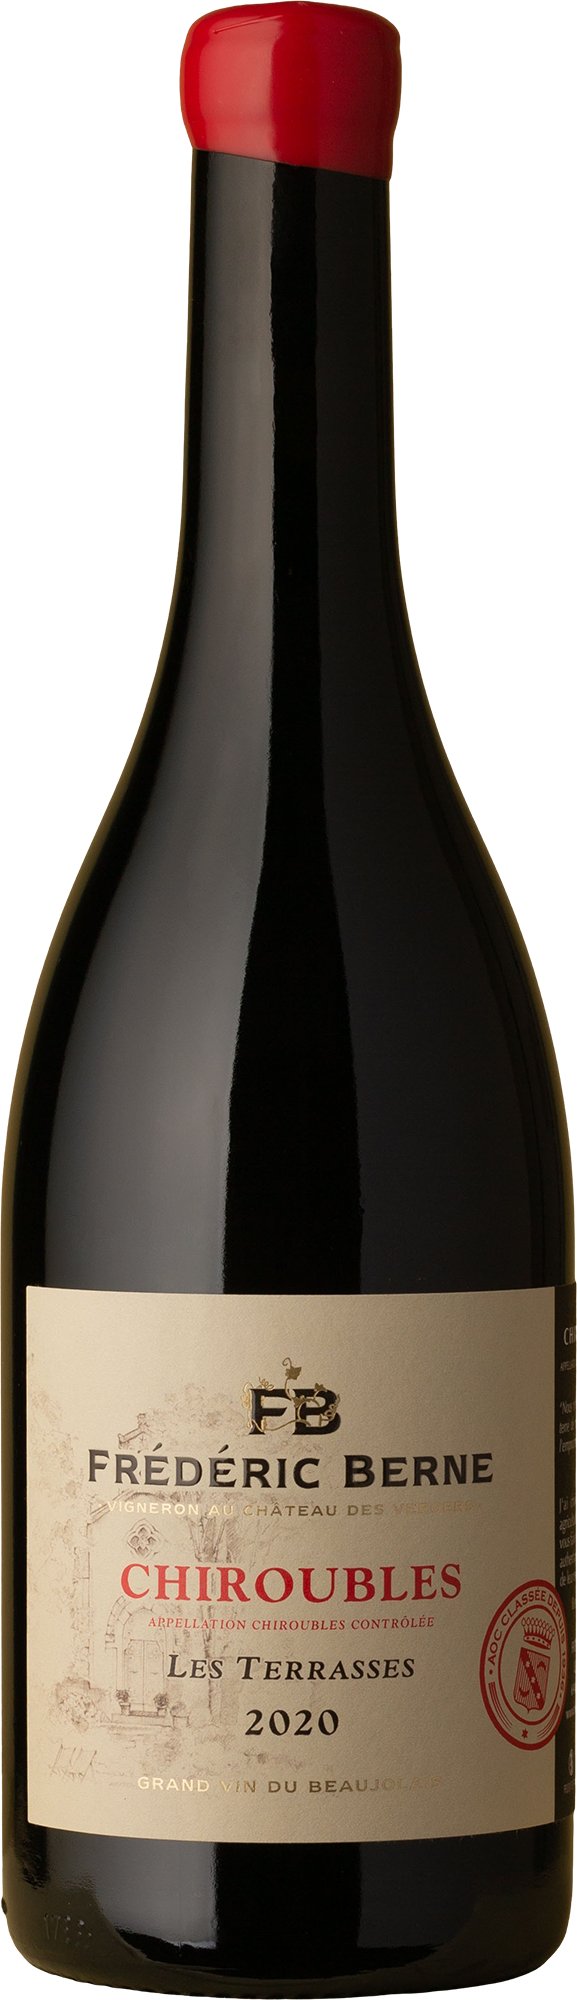 Domaine Frederic Berne - Chiroubles Les Terraces Gamay 2020 Red Wine